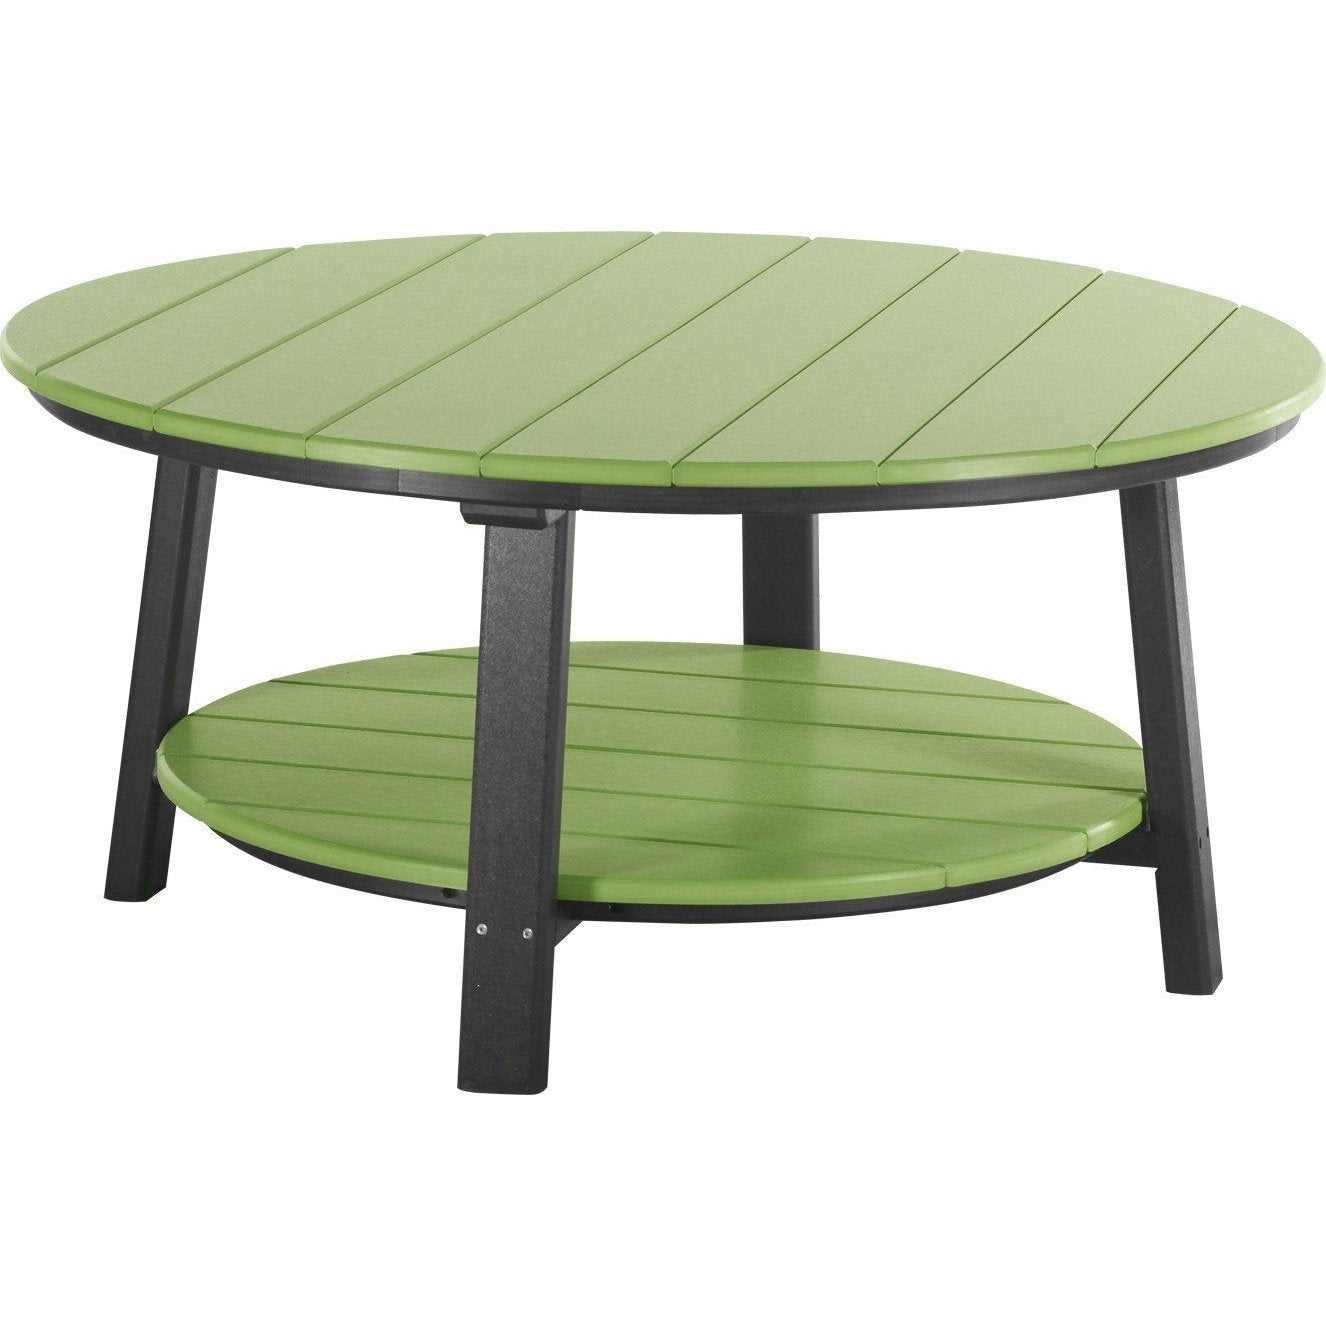 Outdoor Deluxe Conversation Table Lime Green & Black